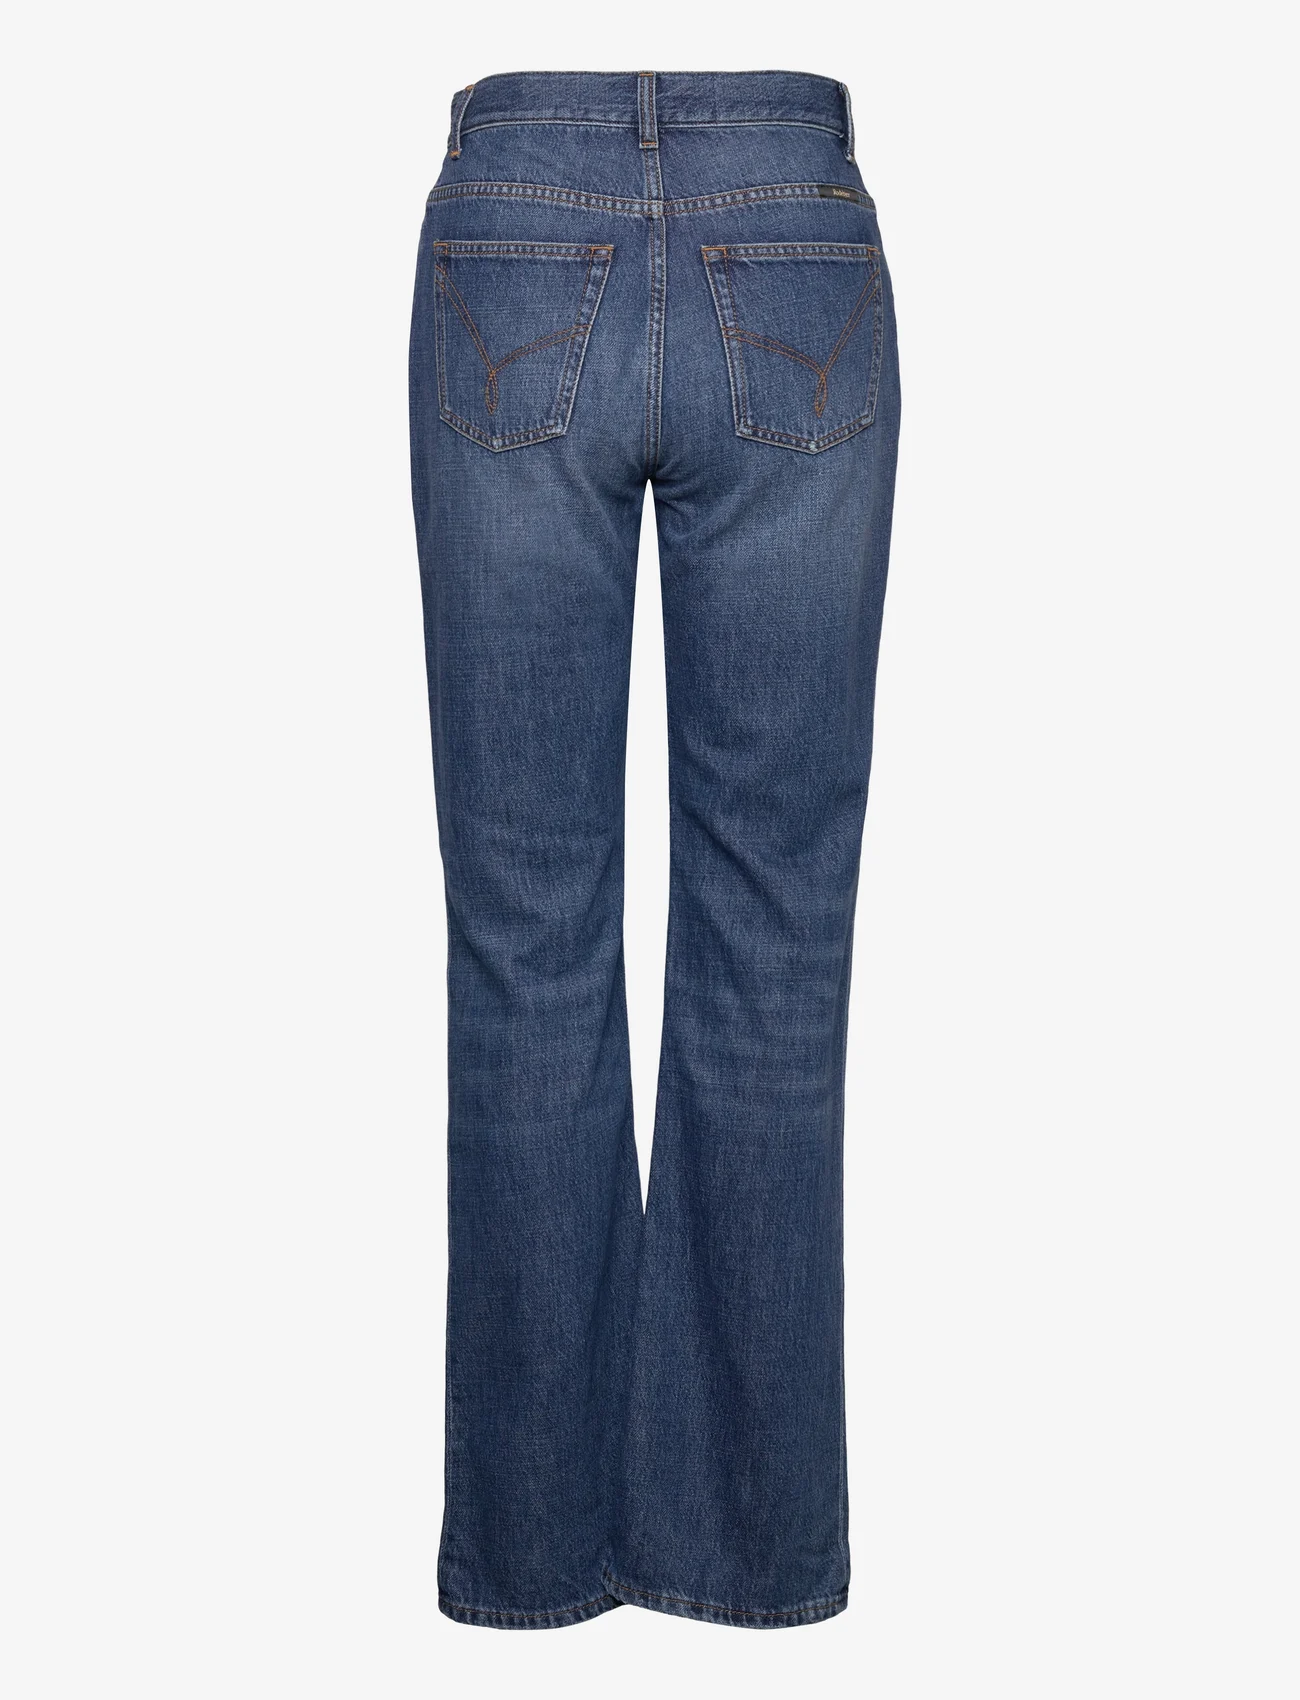 RODEBJER - Rodebjer Extended Flare - flared jeans - indigo - 1